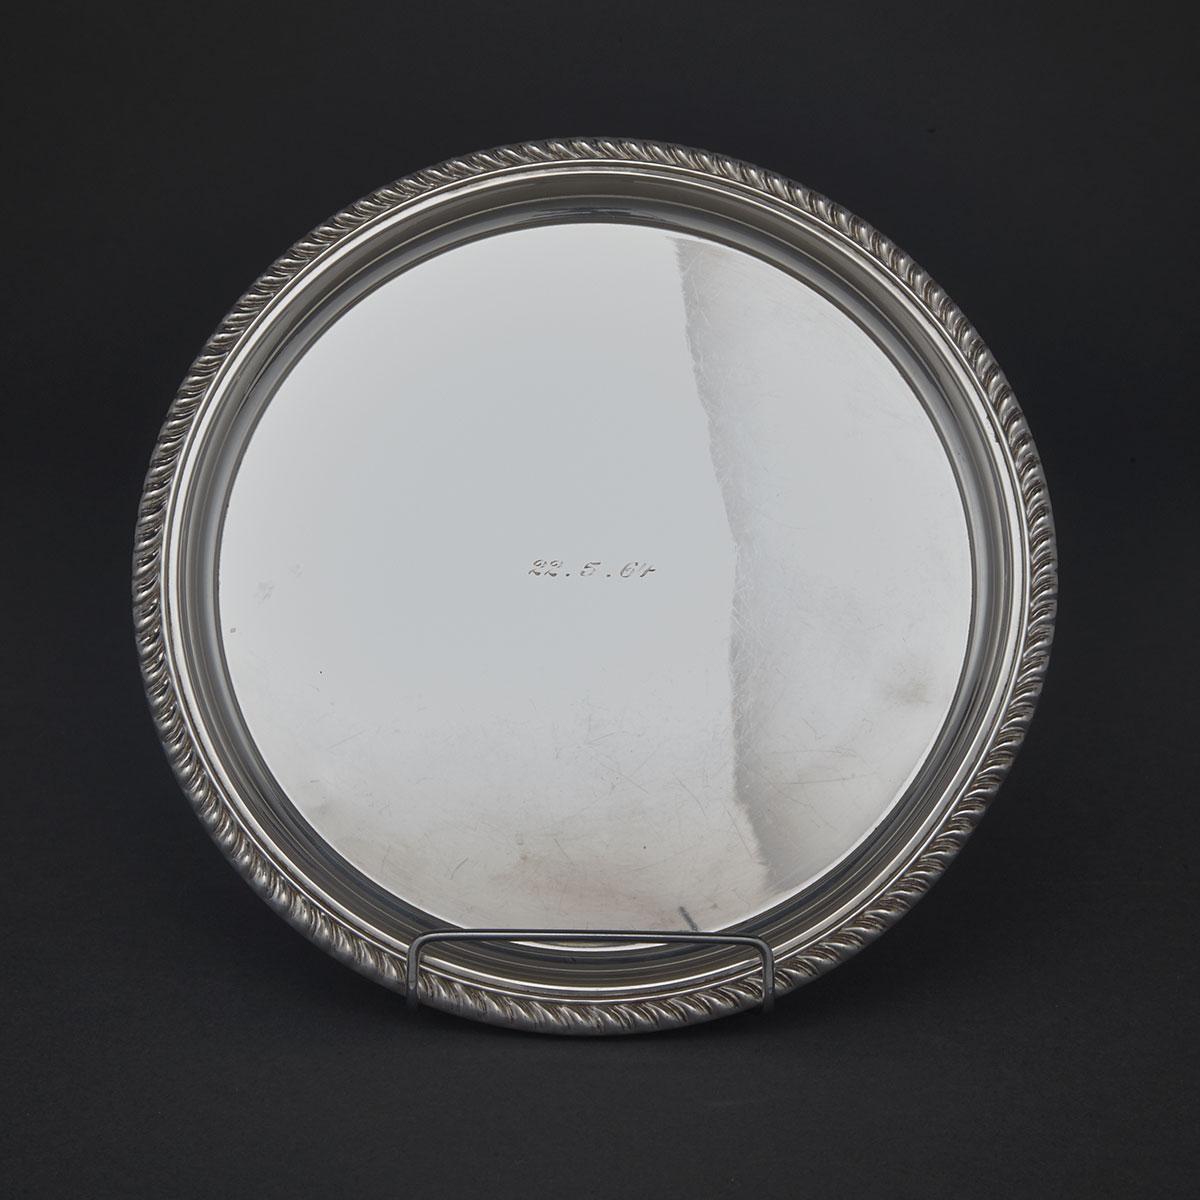 Canadian Silver Small Salver, Henry Birks & Sons, Montreal, Que., 1963